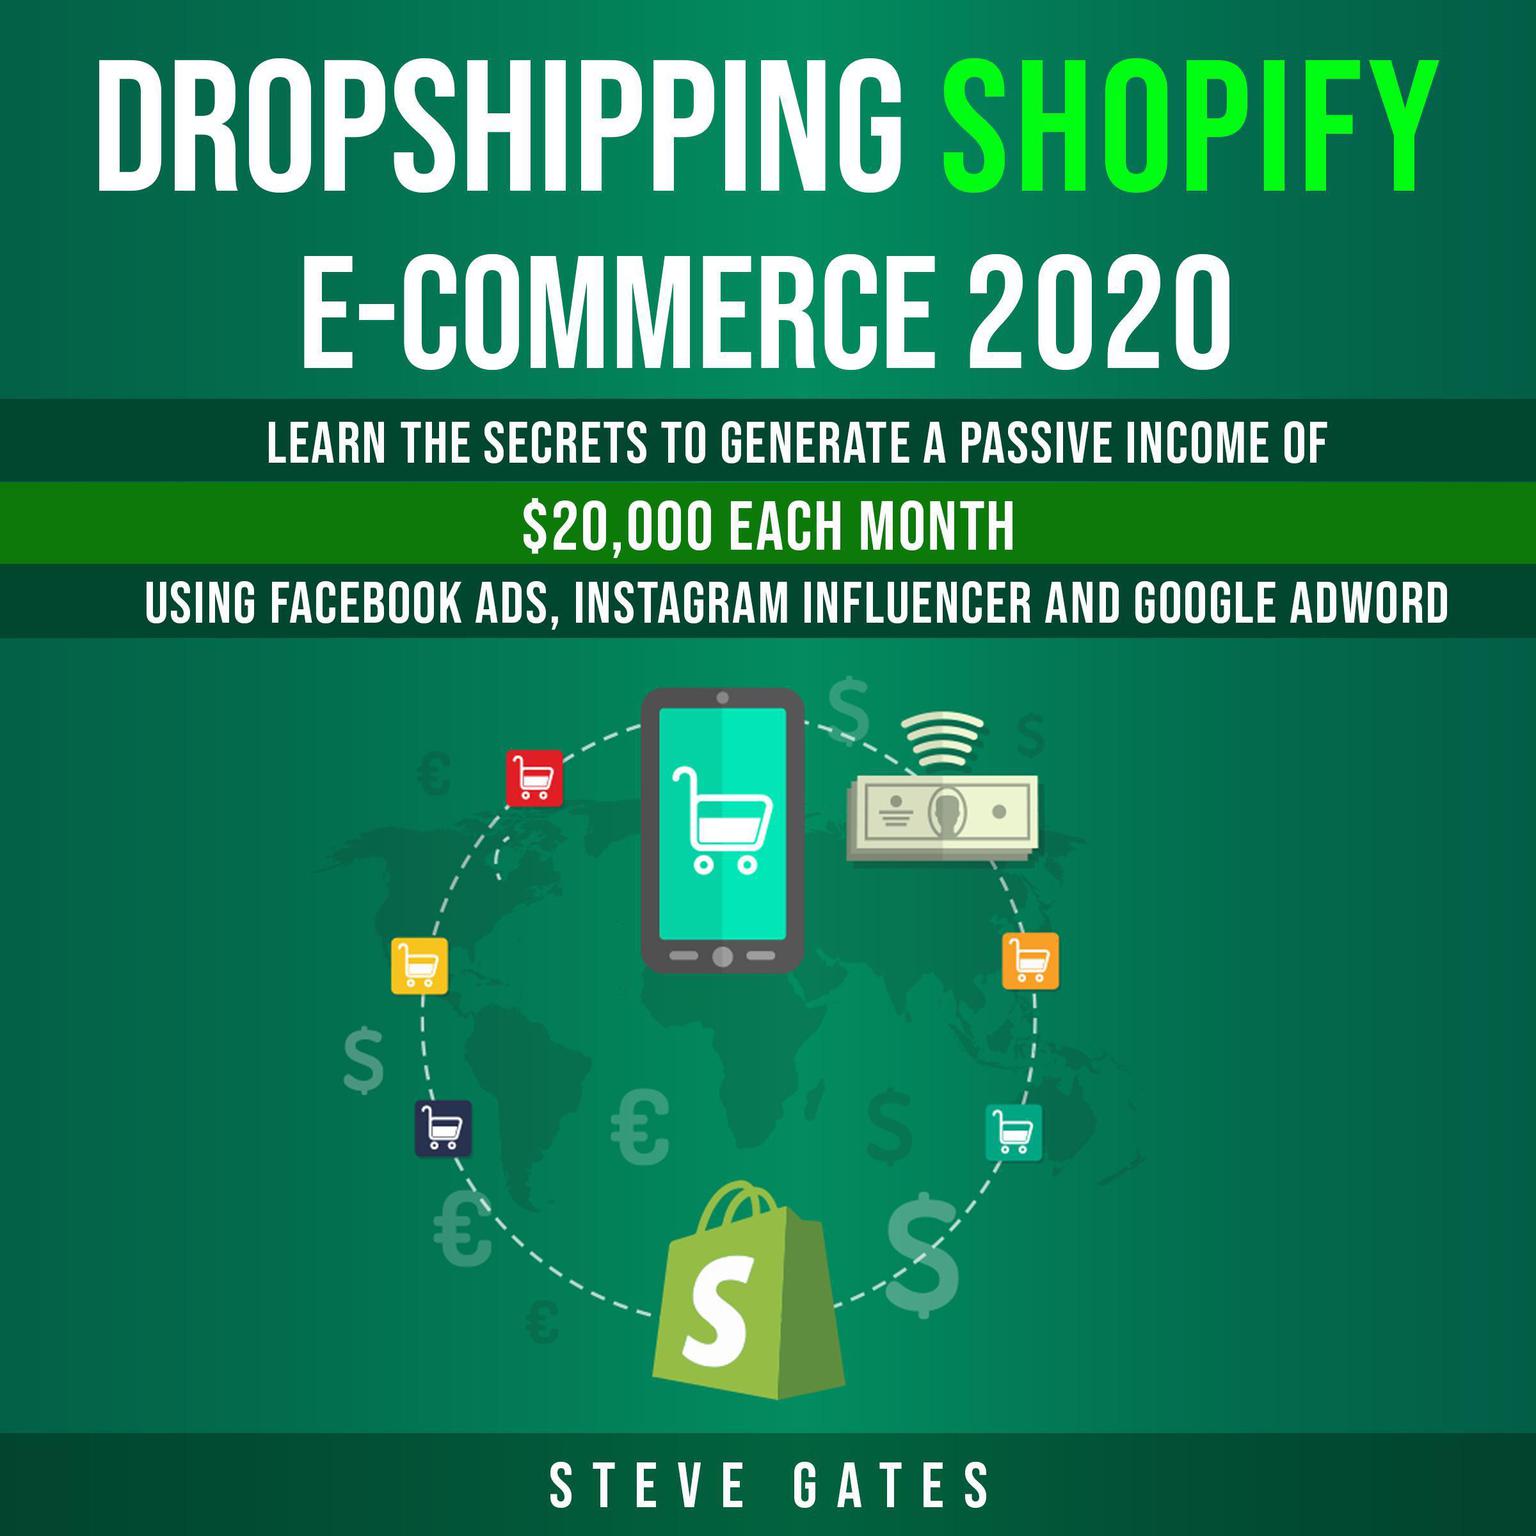 Dropshipping Shopify E-commerce 2020: Learn the Secrets to Generale a Passive Income of $20,000 Each Month Using Facebook Ads, Instagram Influencer and Google Ads: Learn the Secrets to Generale a Passive Income of $20,000 Each Month Using Facebook Ads, Instagram Influencer and Google Ads Audiobook, by Steve Gates